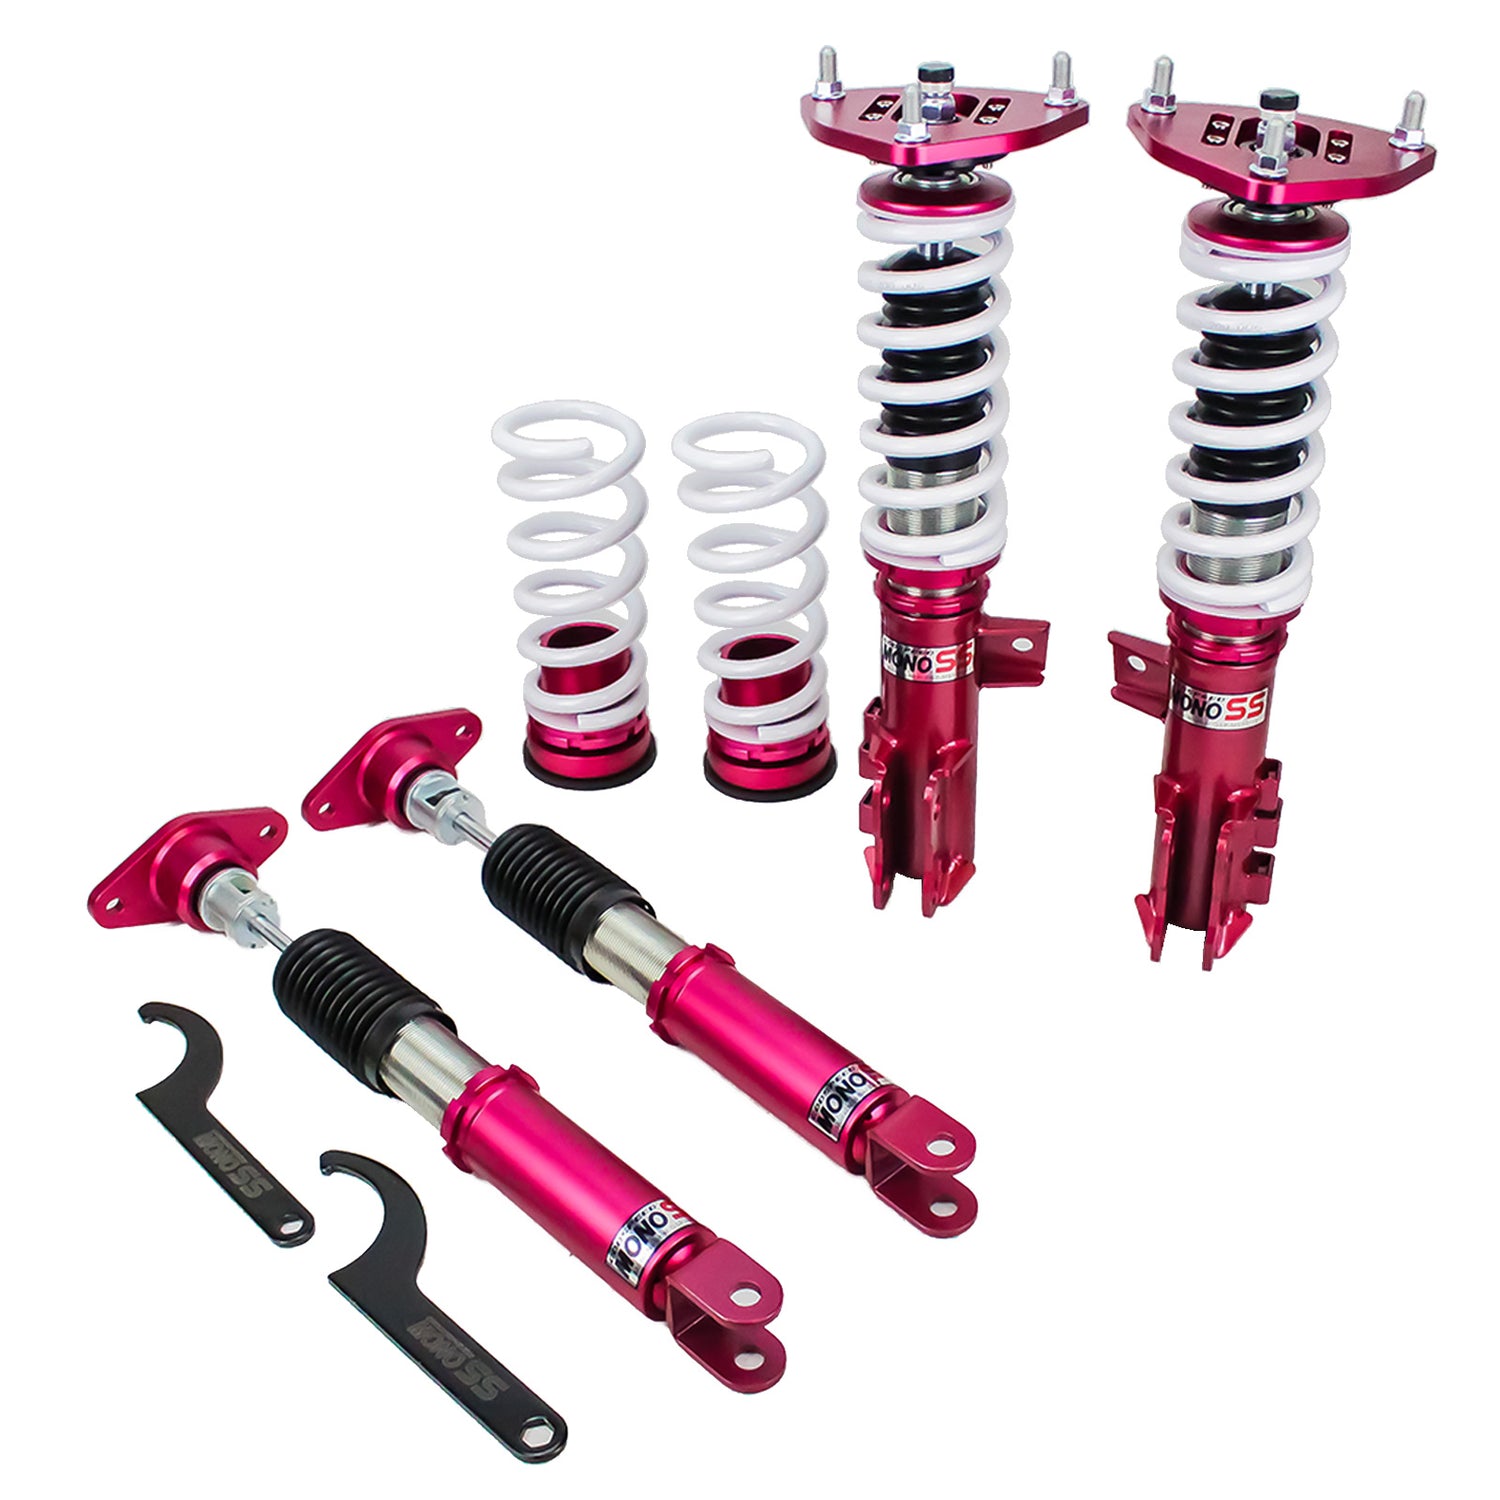 Godspeed MSS0112-B MonoSS Coilover Lowering Kit, Fully Adjustable, Ride Height, Spring Tension And 16 Click Damping, Kia Optima(TF) 2013-15